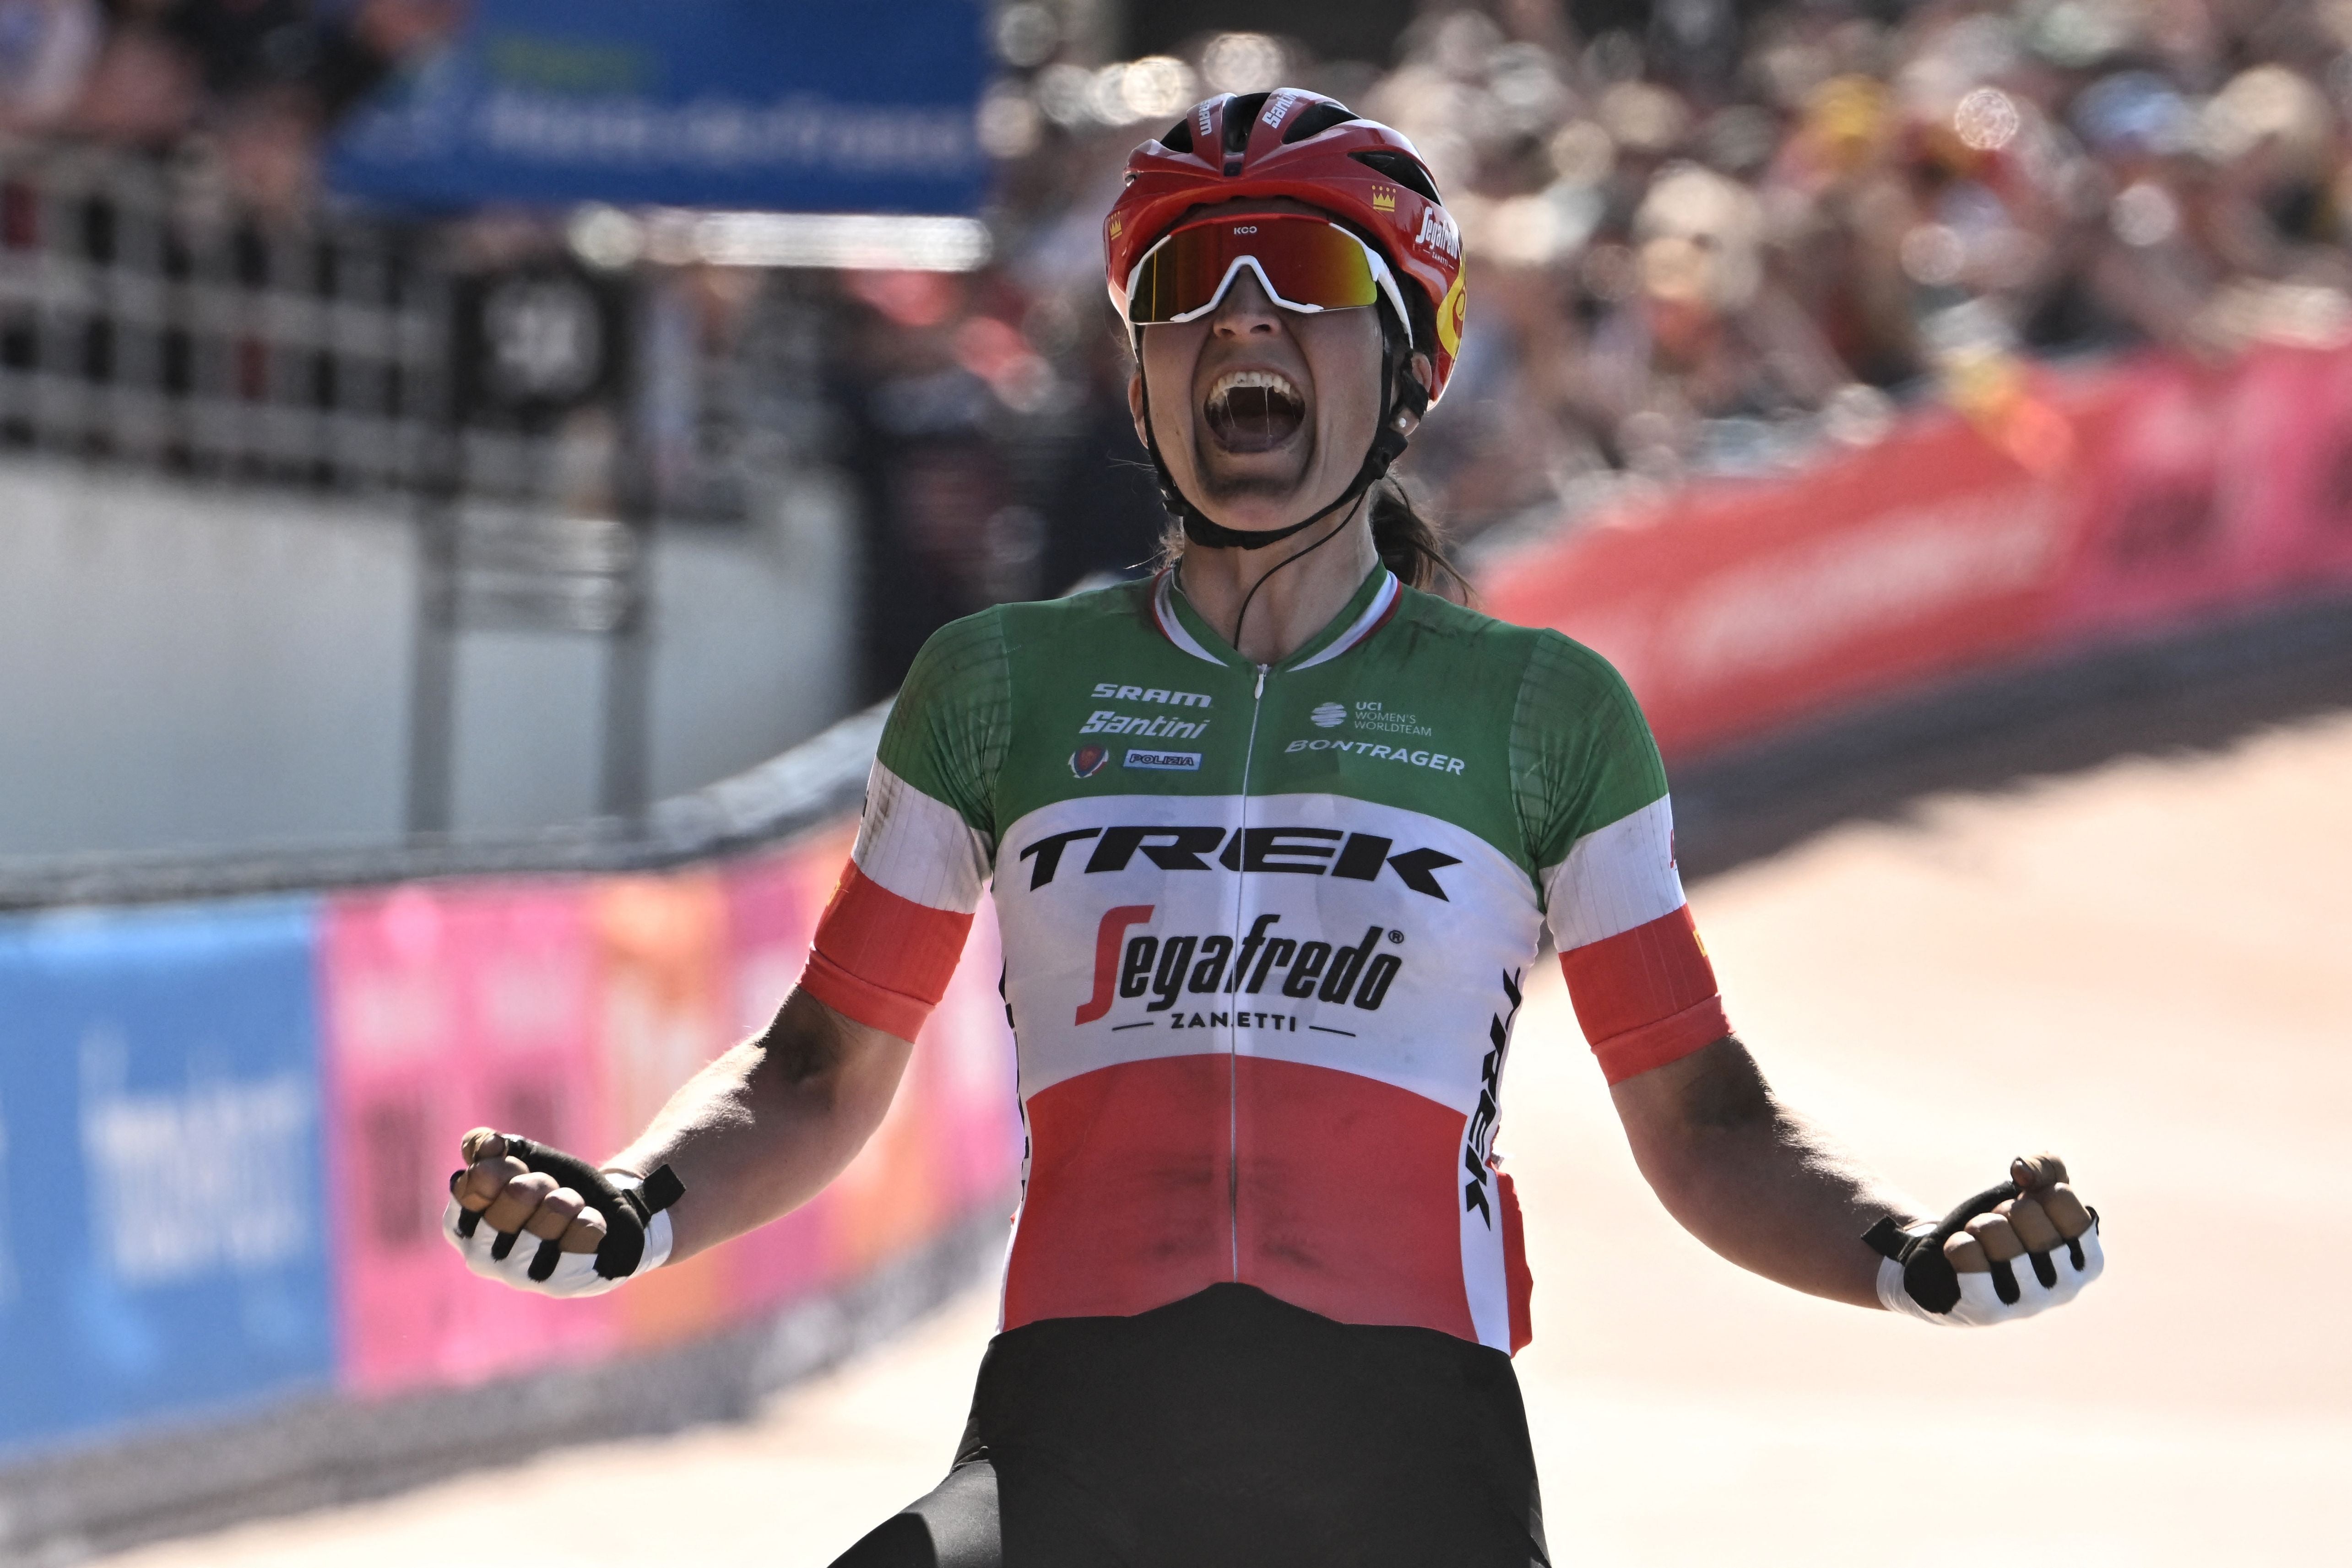 Trek-Segafredo's Italian rider Elisa Longo Borghini celebrates as she crosses the finish line to win the second edition of the Paris-Roubaix one-day classic cycling race, between Denain and Roubaix, in the Roubaix Velodrome in northern France